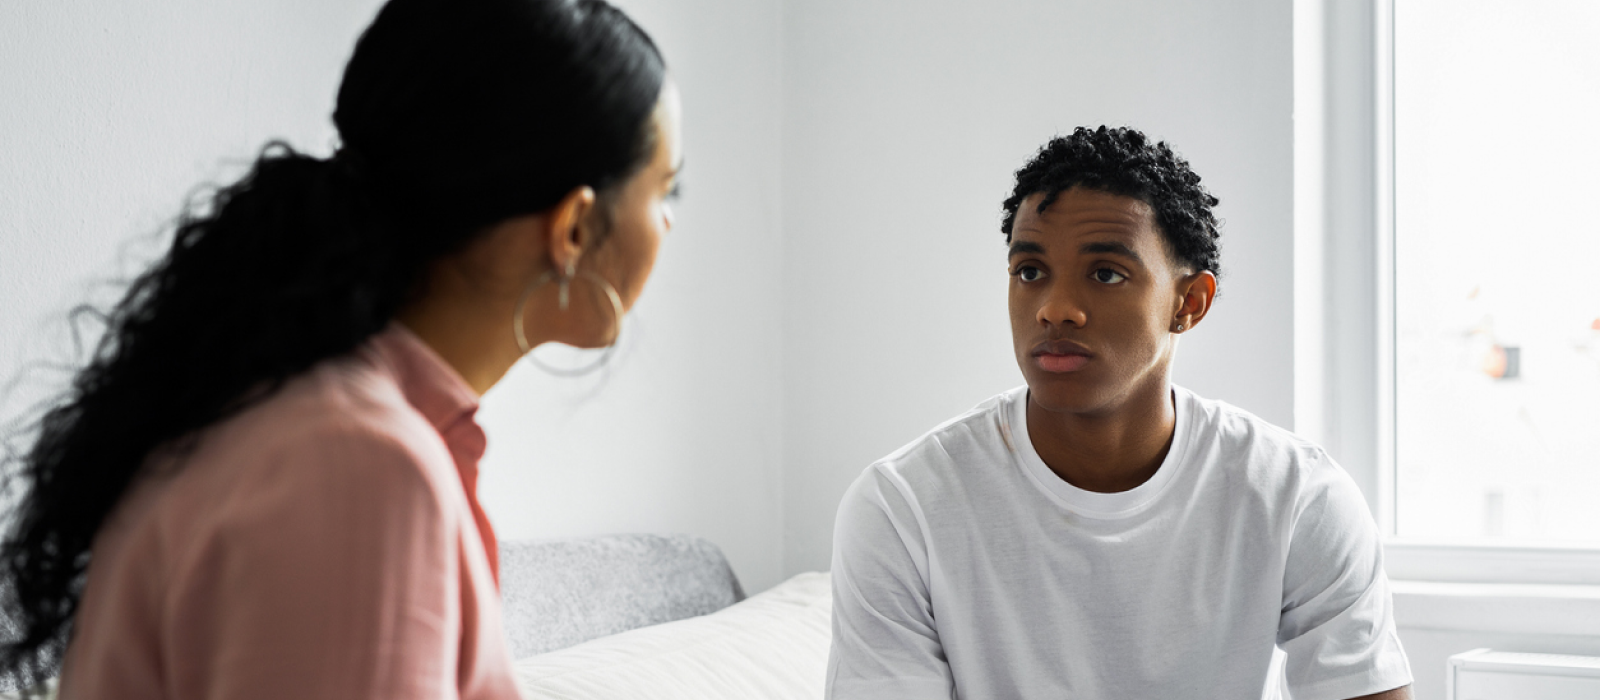 A young male seeks therapy for depression following a breakup. He is learning ways to heal from depression after a breakup.